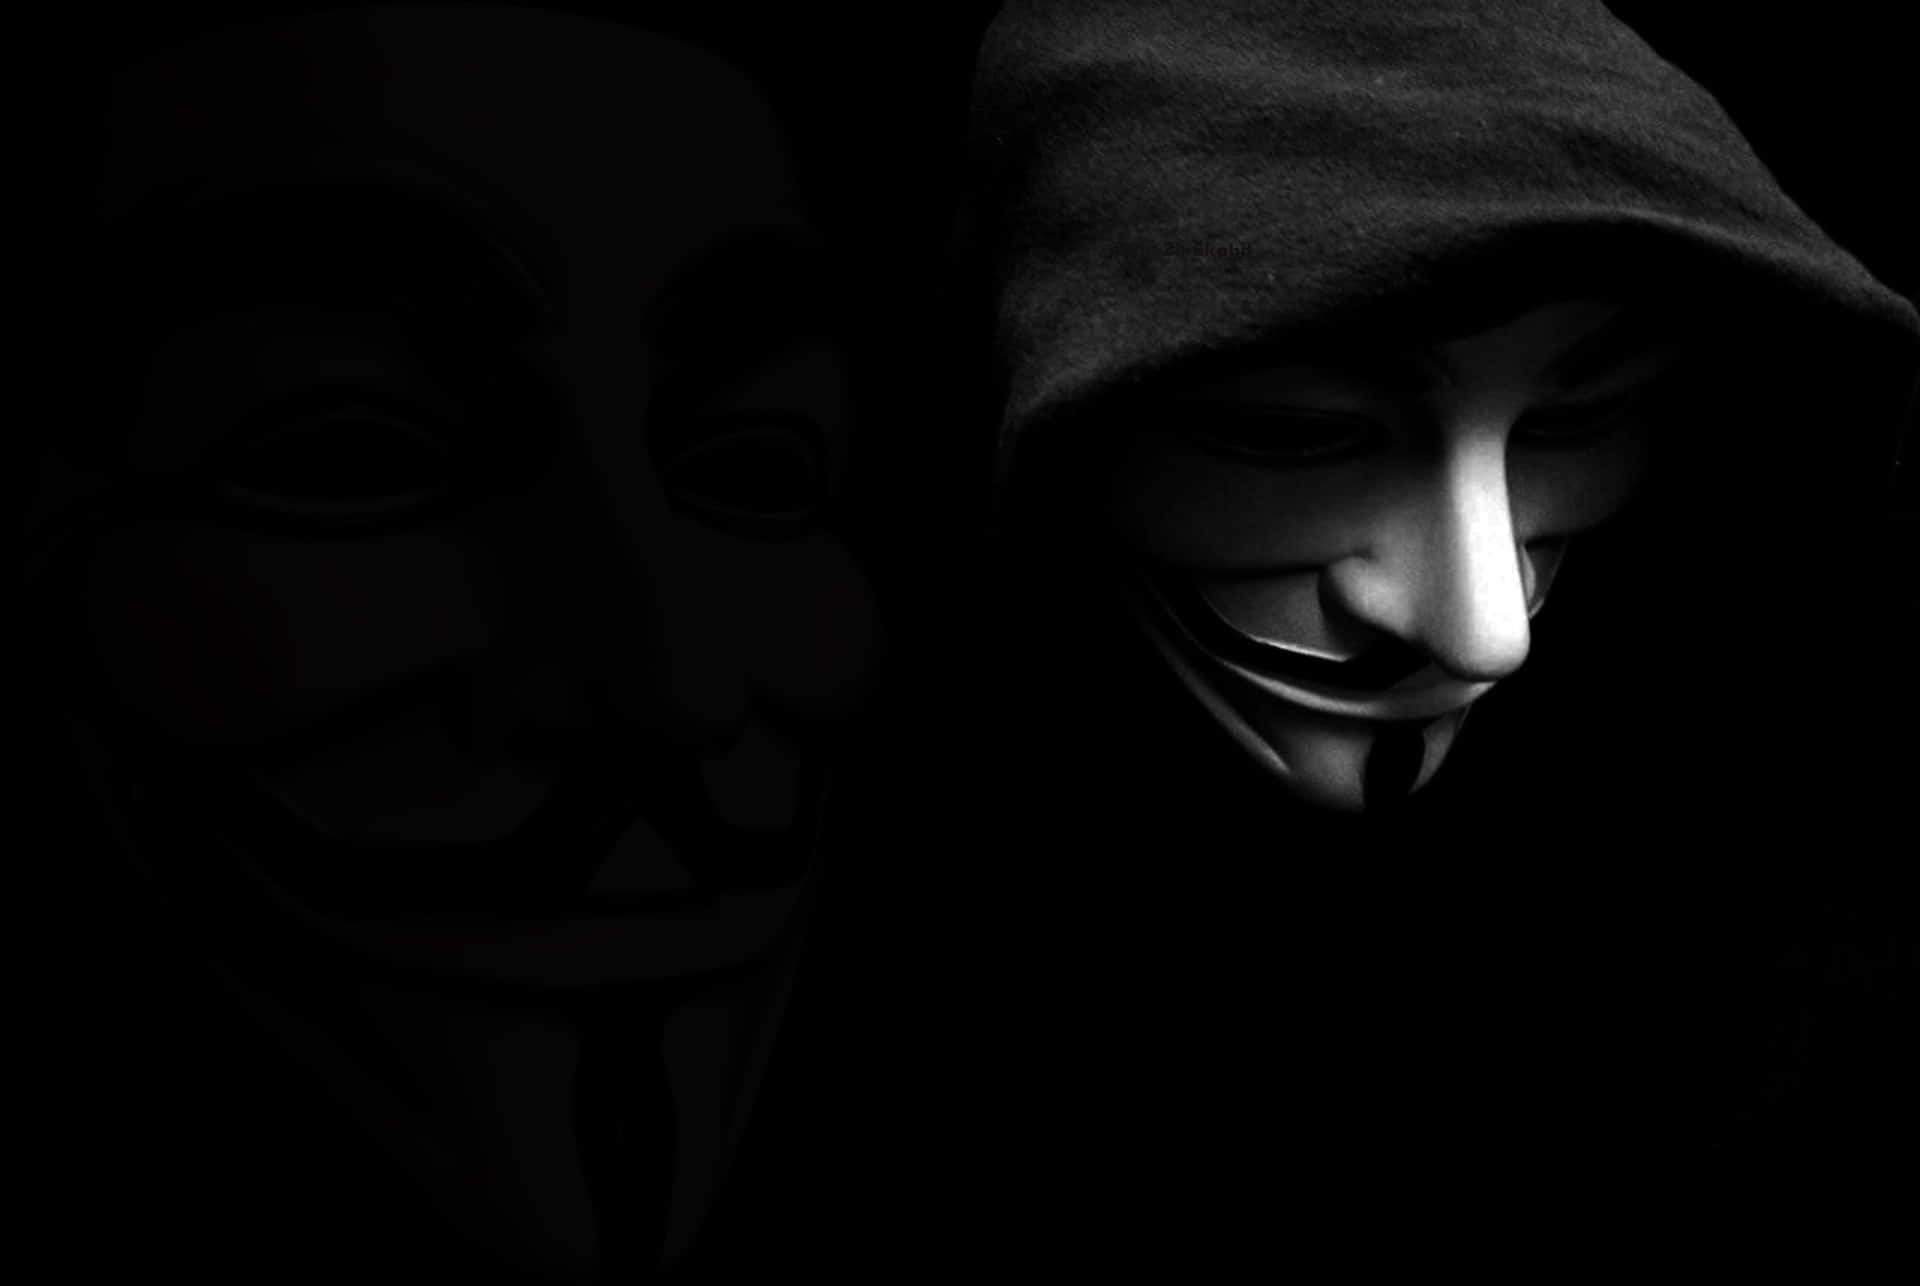 A Black Background With A Hooded Man In A Mask